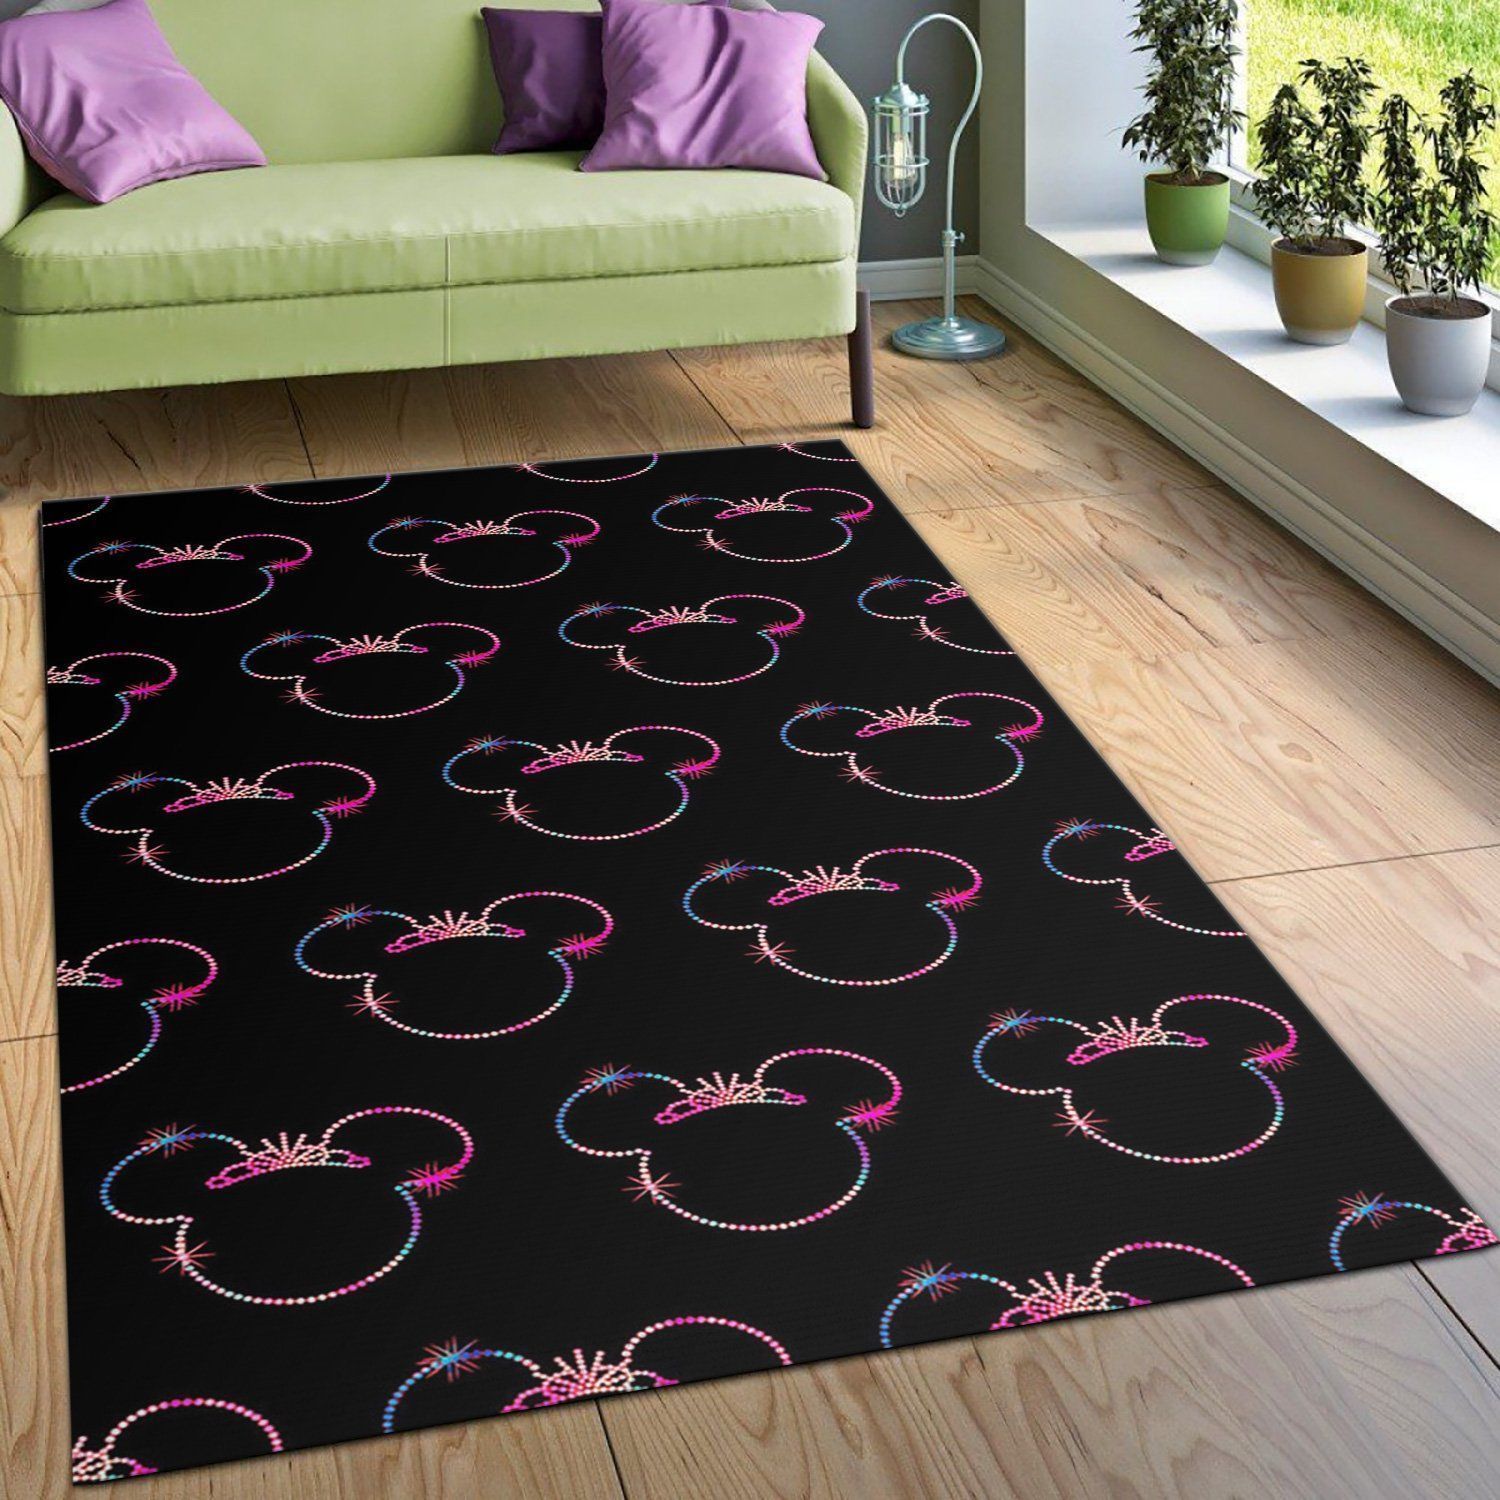 Minnie Mouse Black And Colorful Movie Area Rug, Kitchen Rug, Family Gift US Decor - Indoor Outdoor Rugs 2